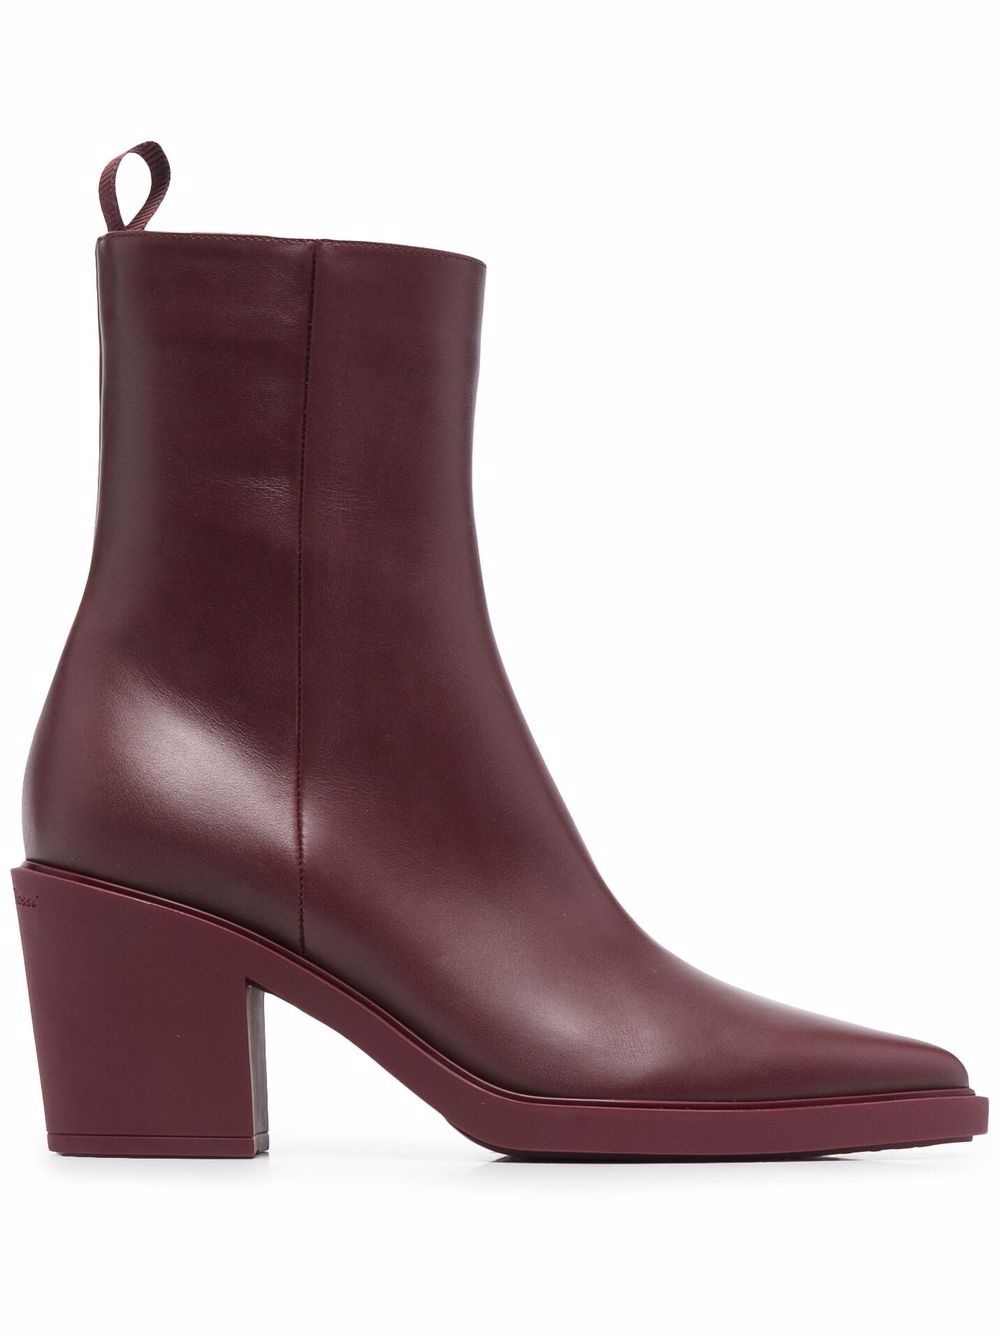 Gianvito Rossi heeled ankle boots - Brown